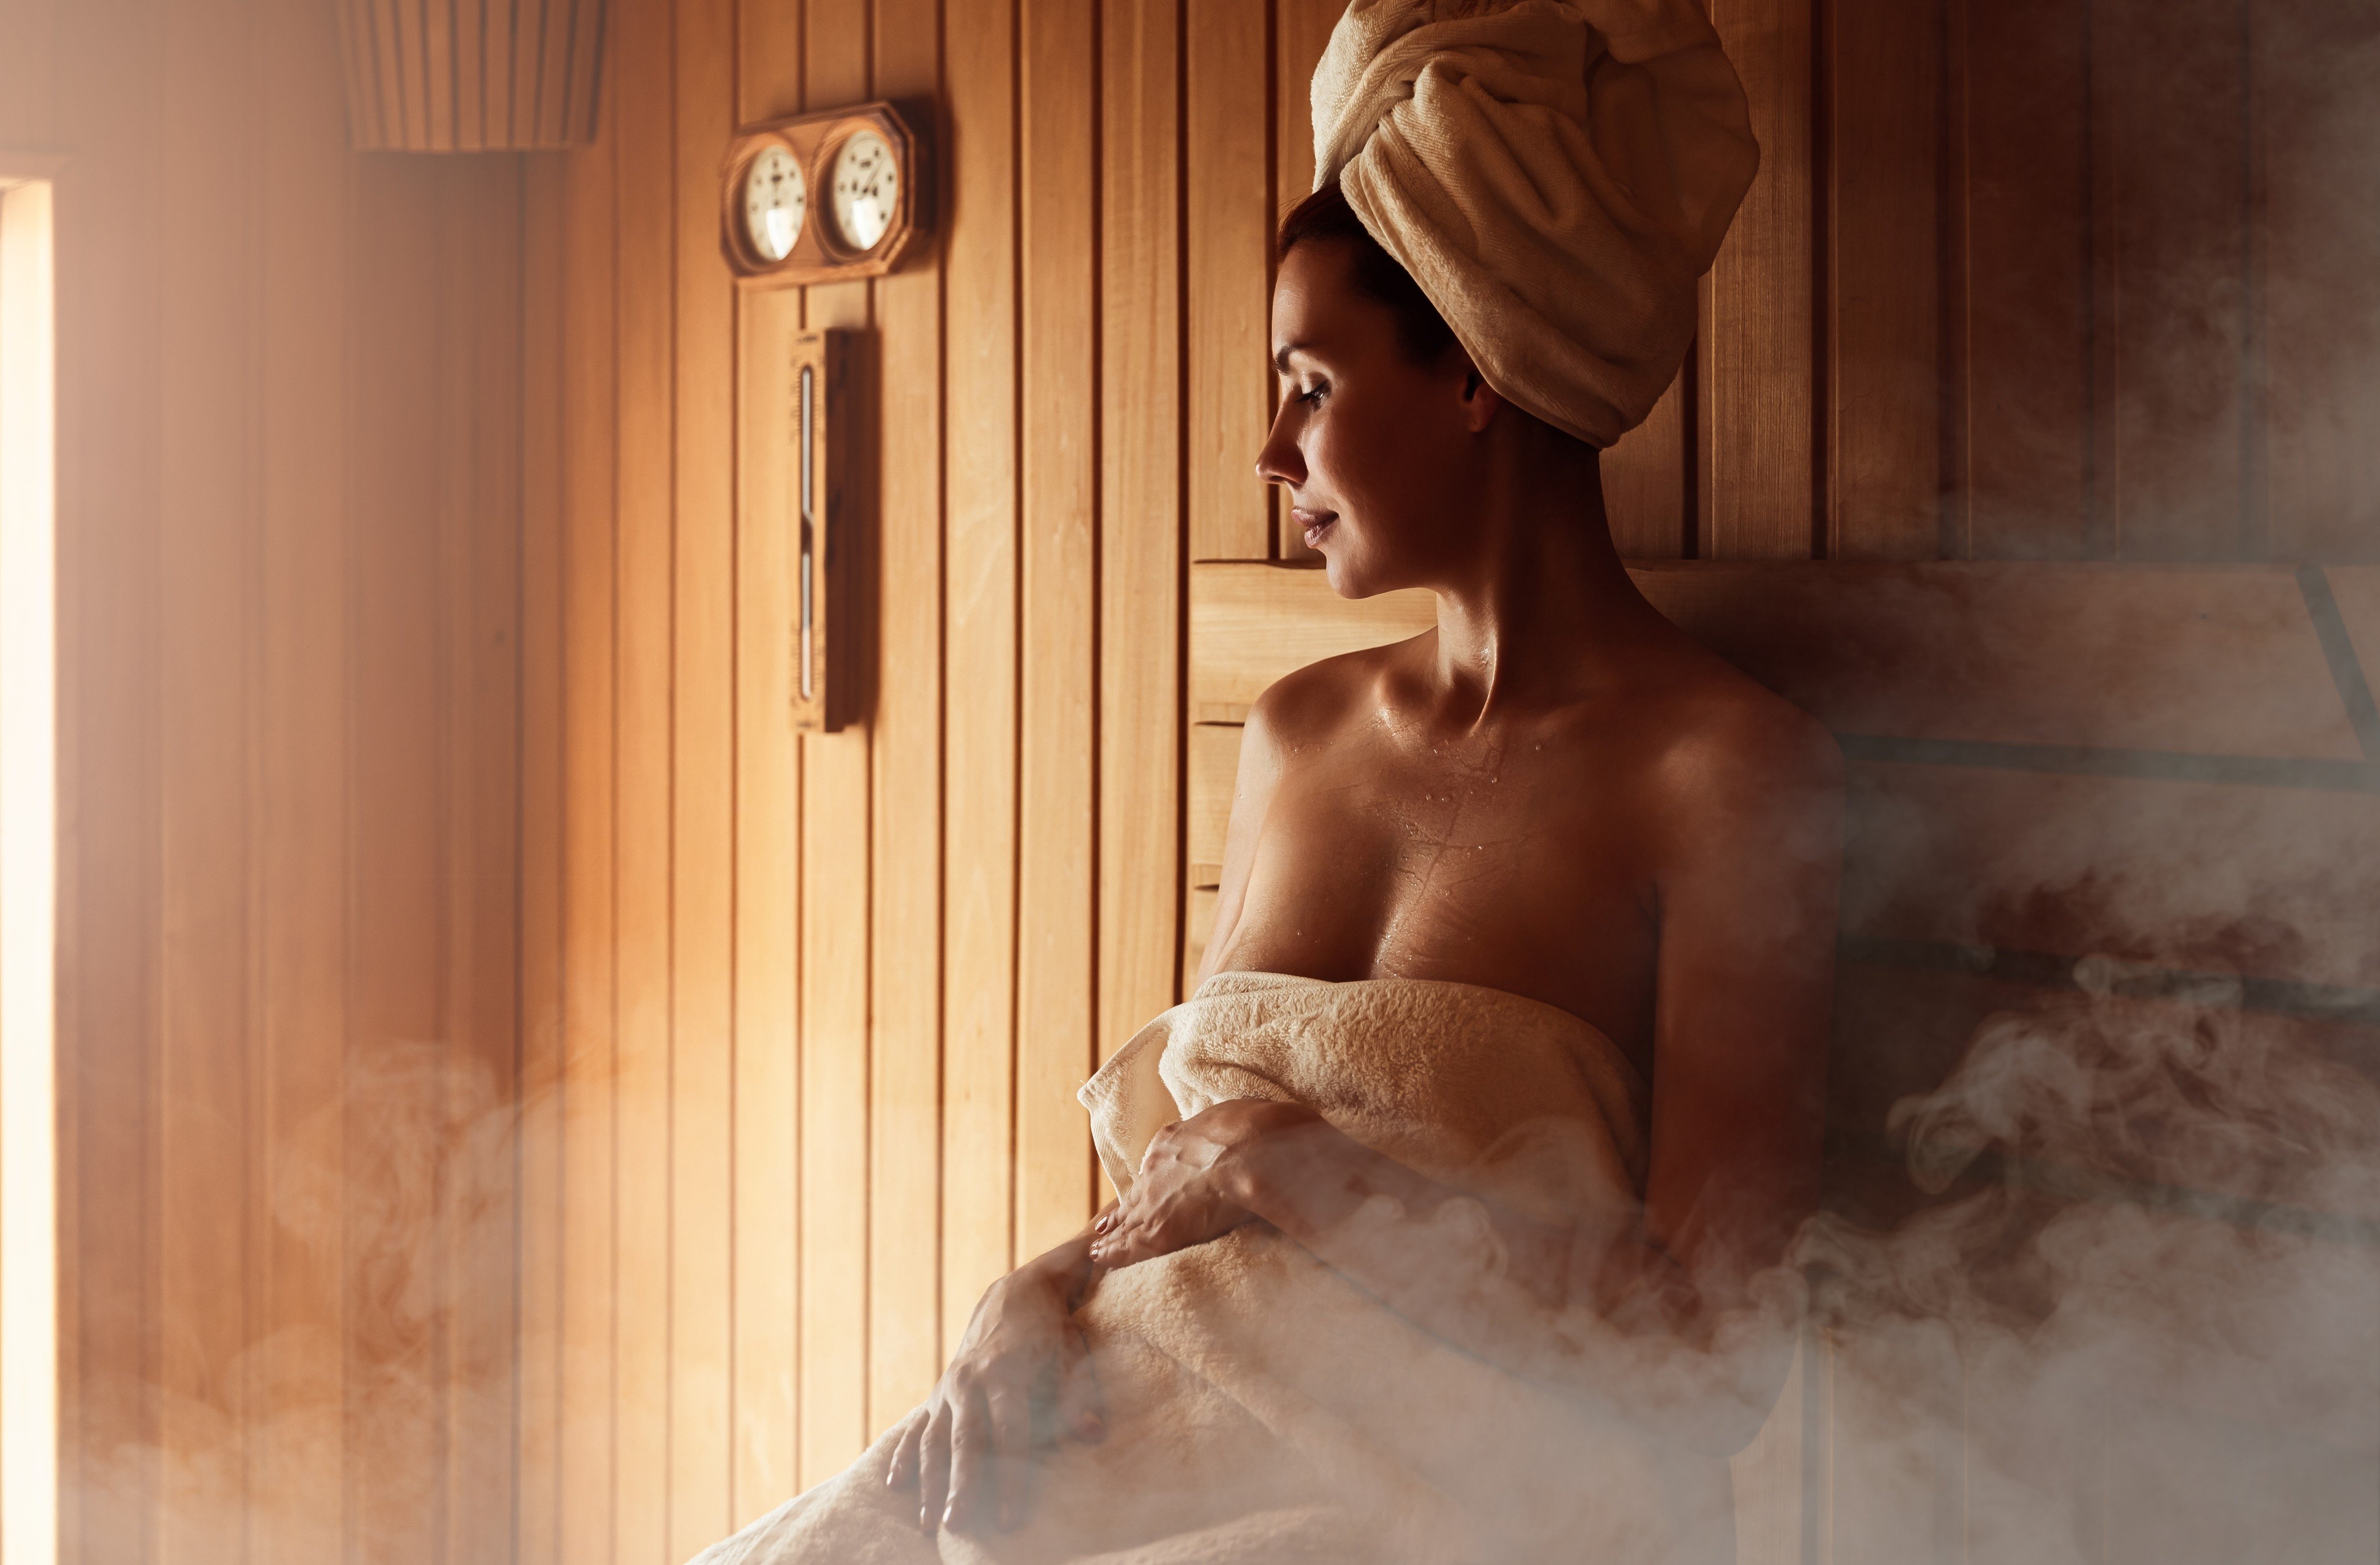 In Finland, the world’s happiest country, taking a sauna is like taking a shower. Having regular saunas bring multiple health benefits, studies have shown. Photo: Shutterstock